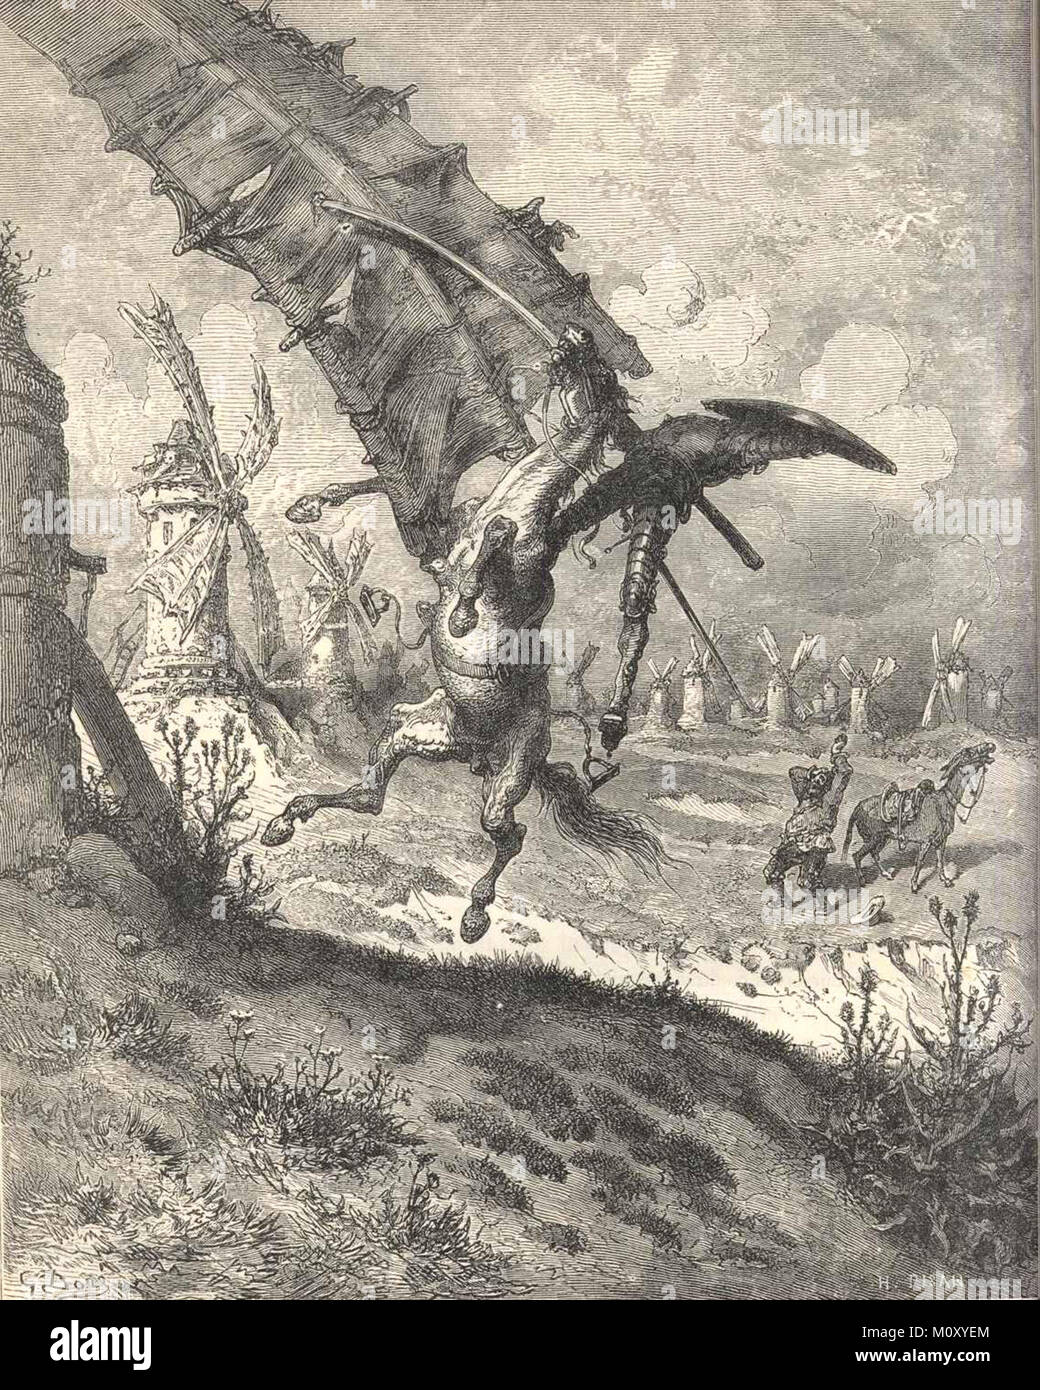 Don Quijote (Don Quixote) Illustration by Gustave Doré, depicting the famous windmill scene. Stock Photo